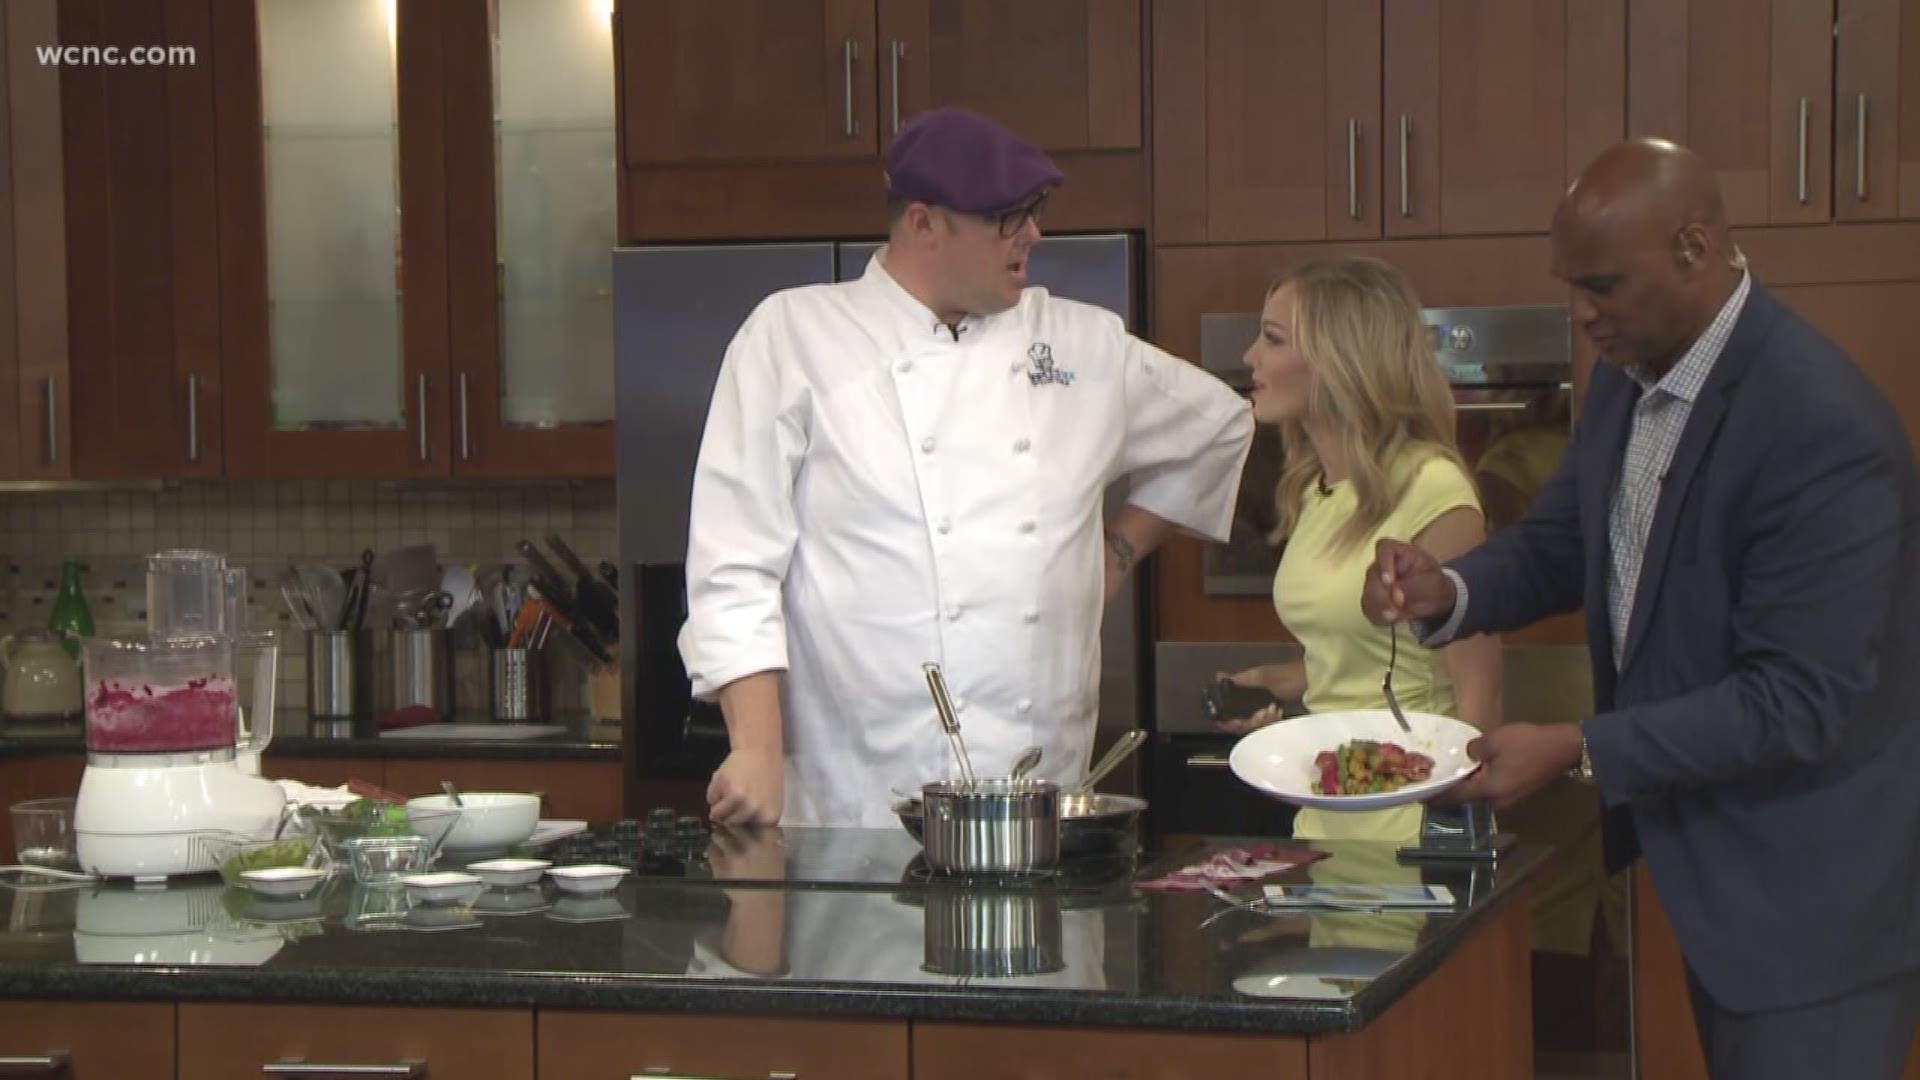 Chef Ross Purple shares the recipe